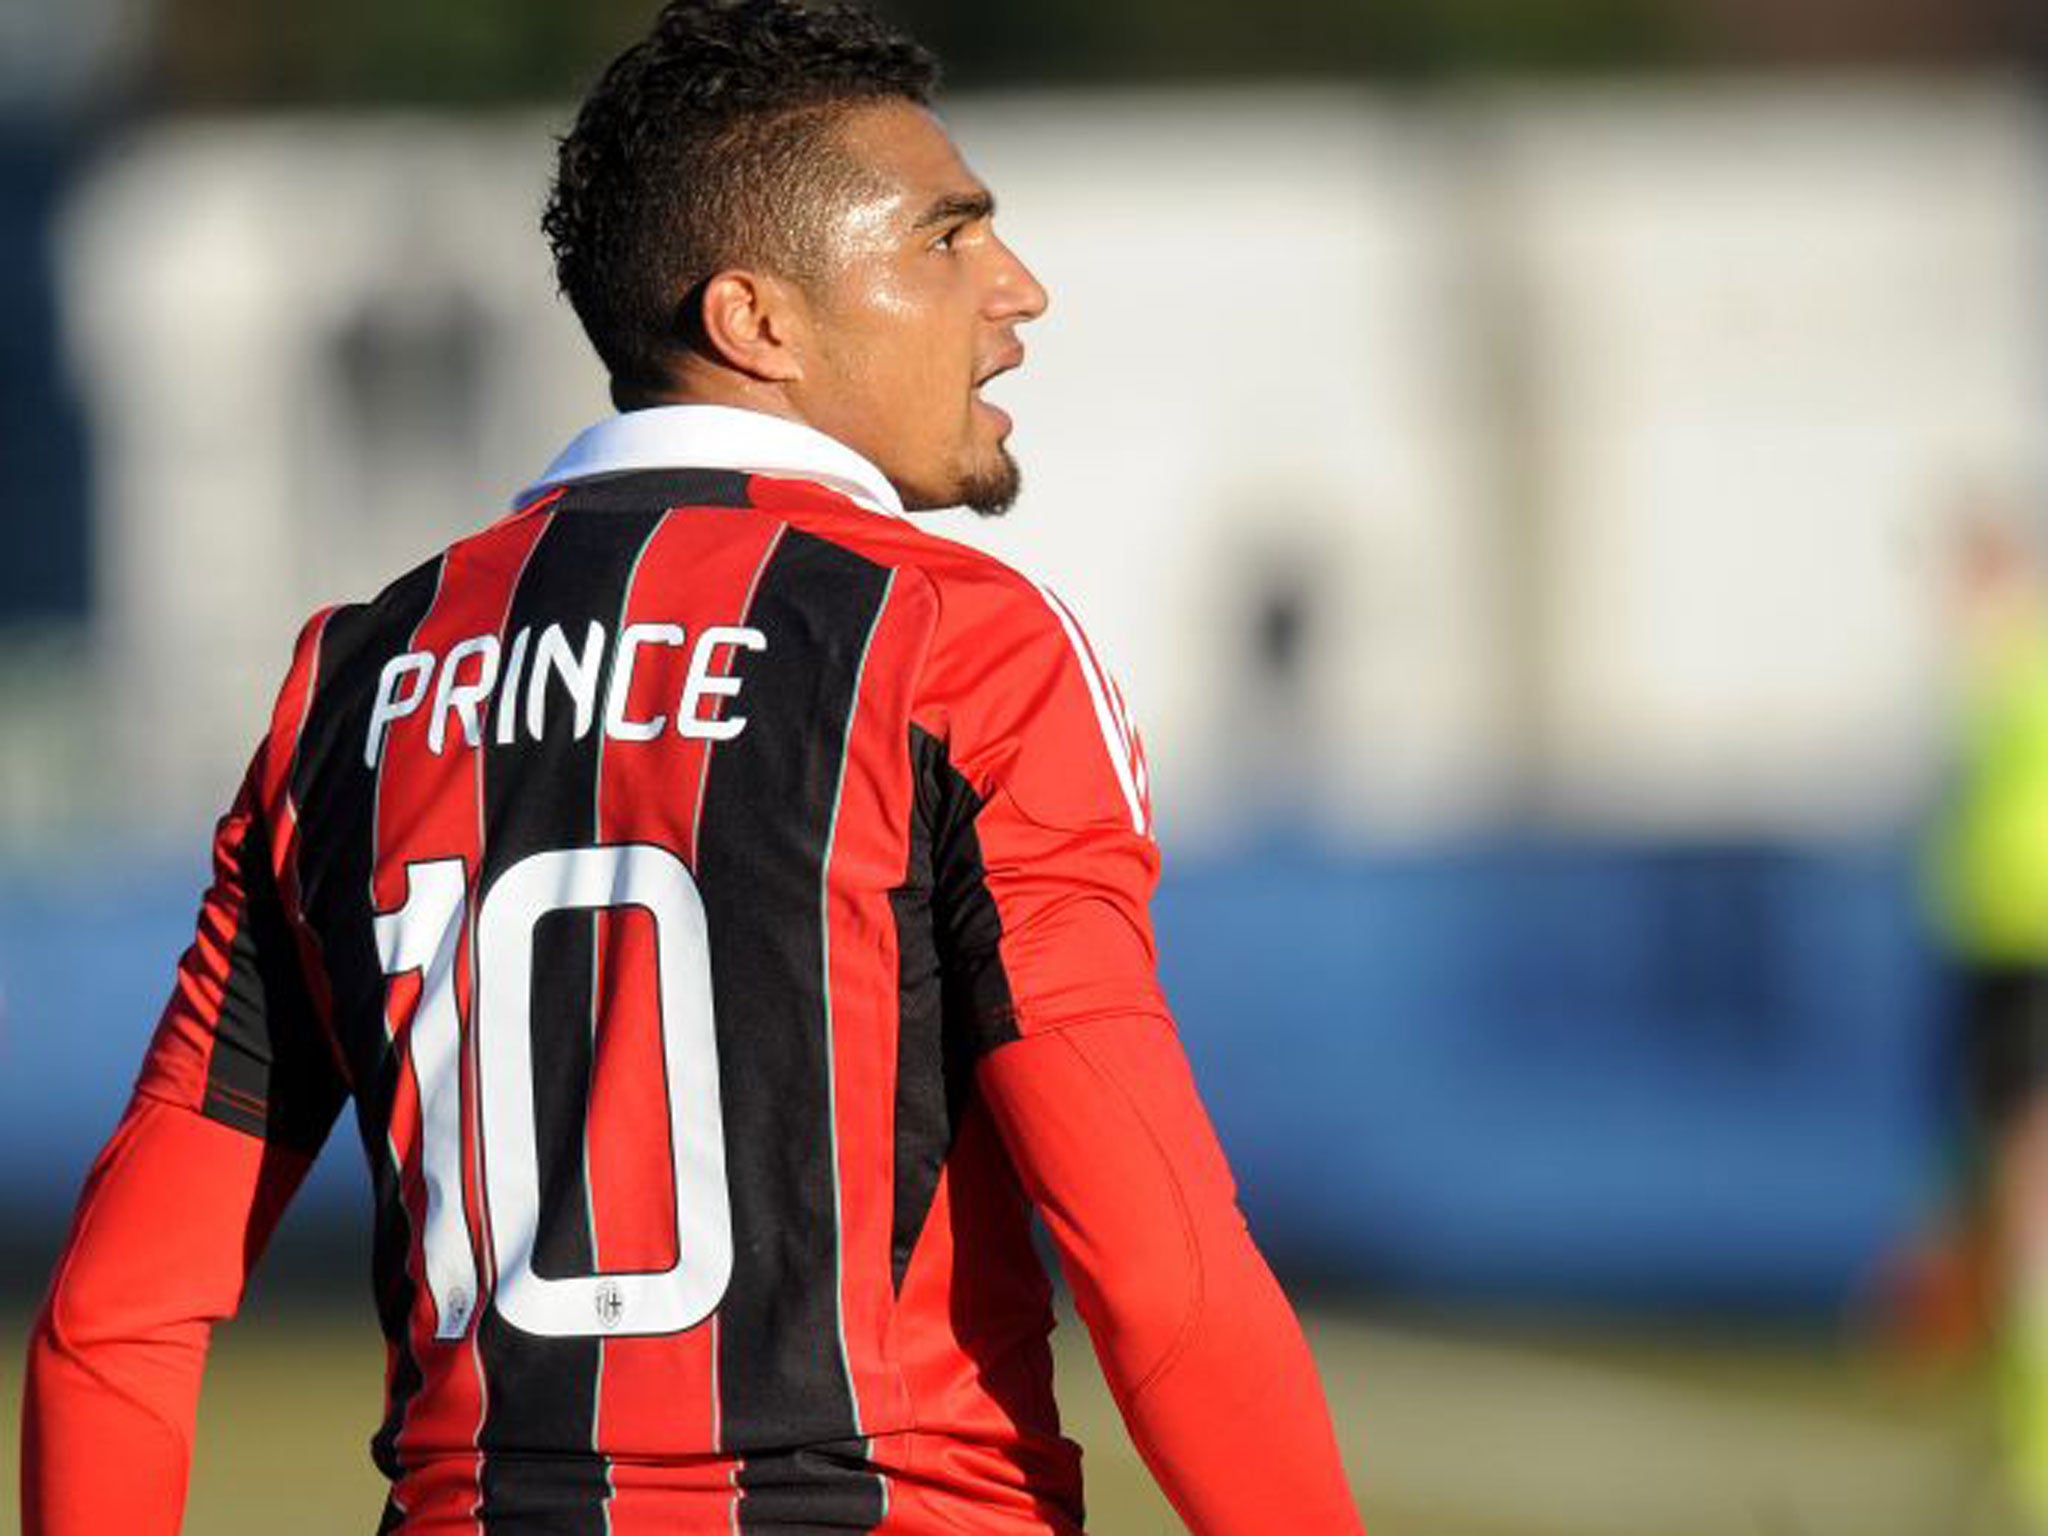 Kevin-Prince Boateng led the teams and officials off the pitch after racist abuse